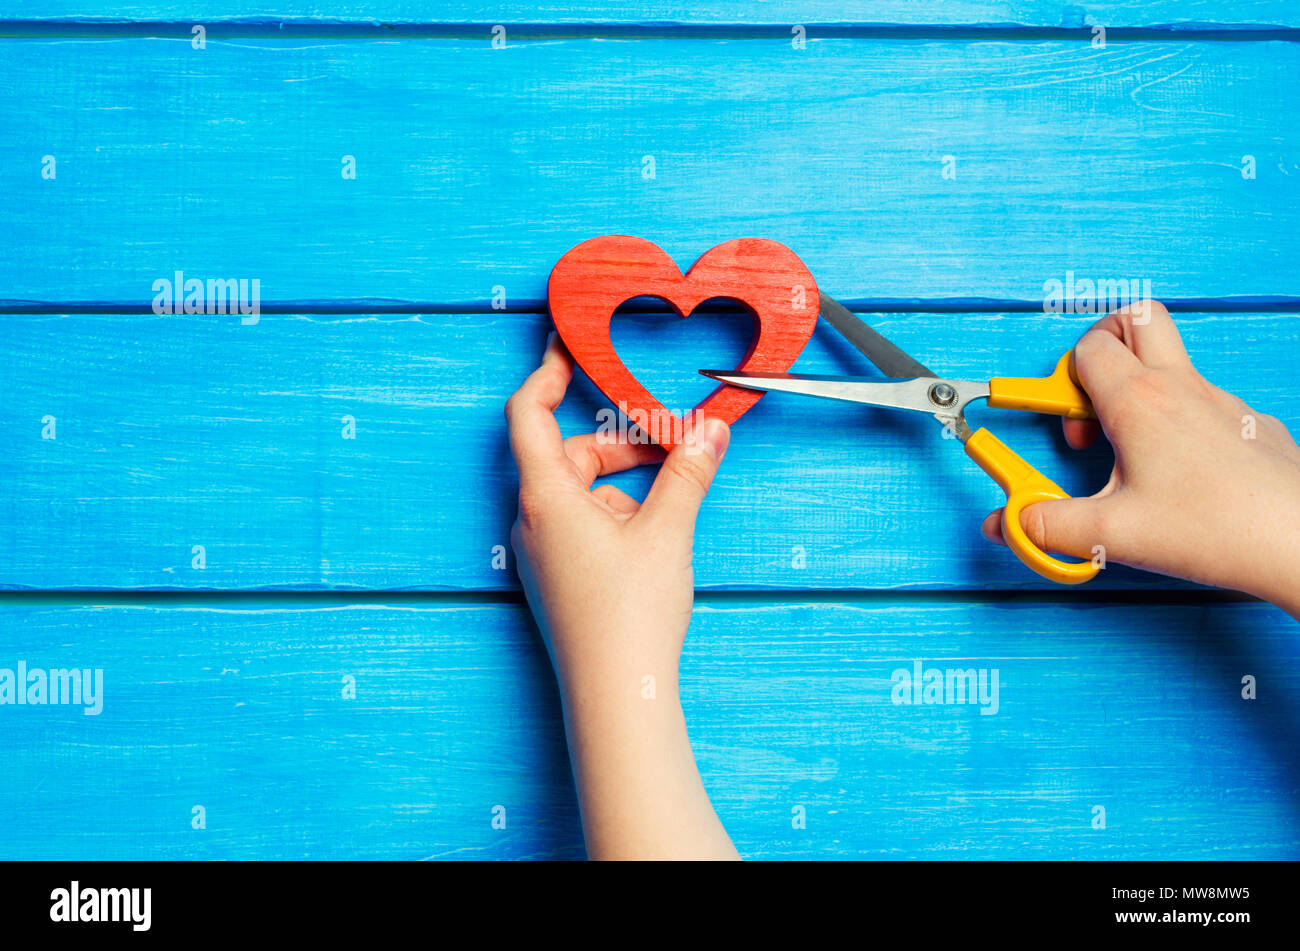 Female hands cut a wooden red heart with scissors on a blue background. The concept of breaking relations, quarrel, divorce. The pair diverges. Betray Stock Photo